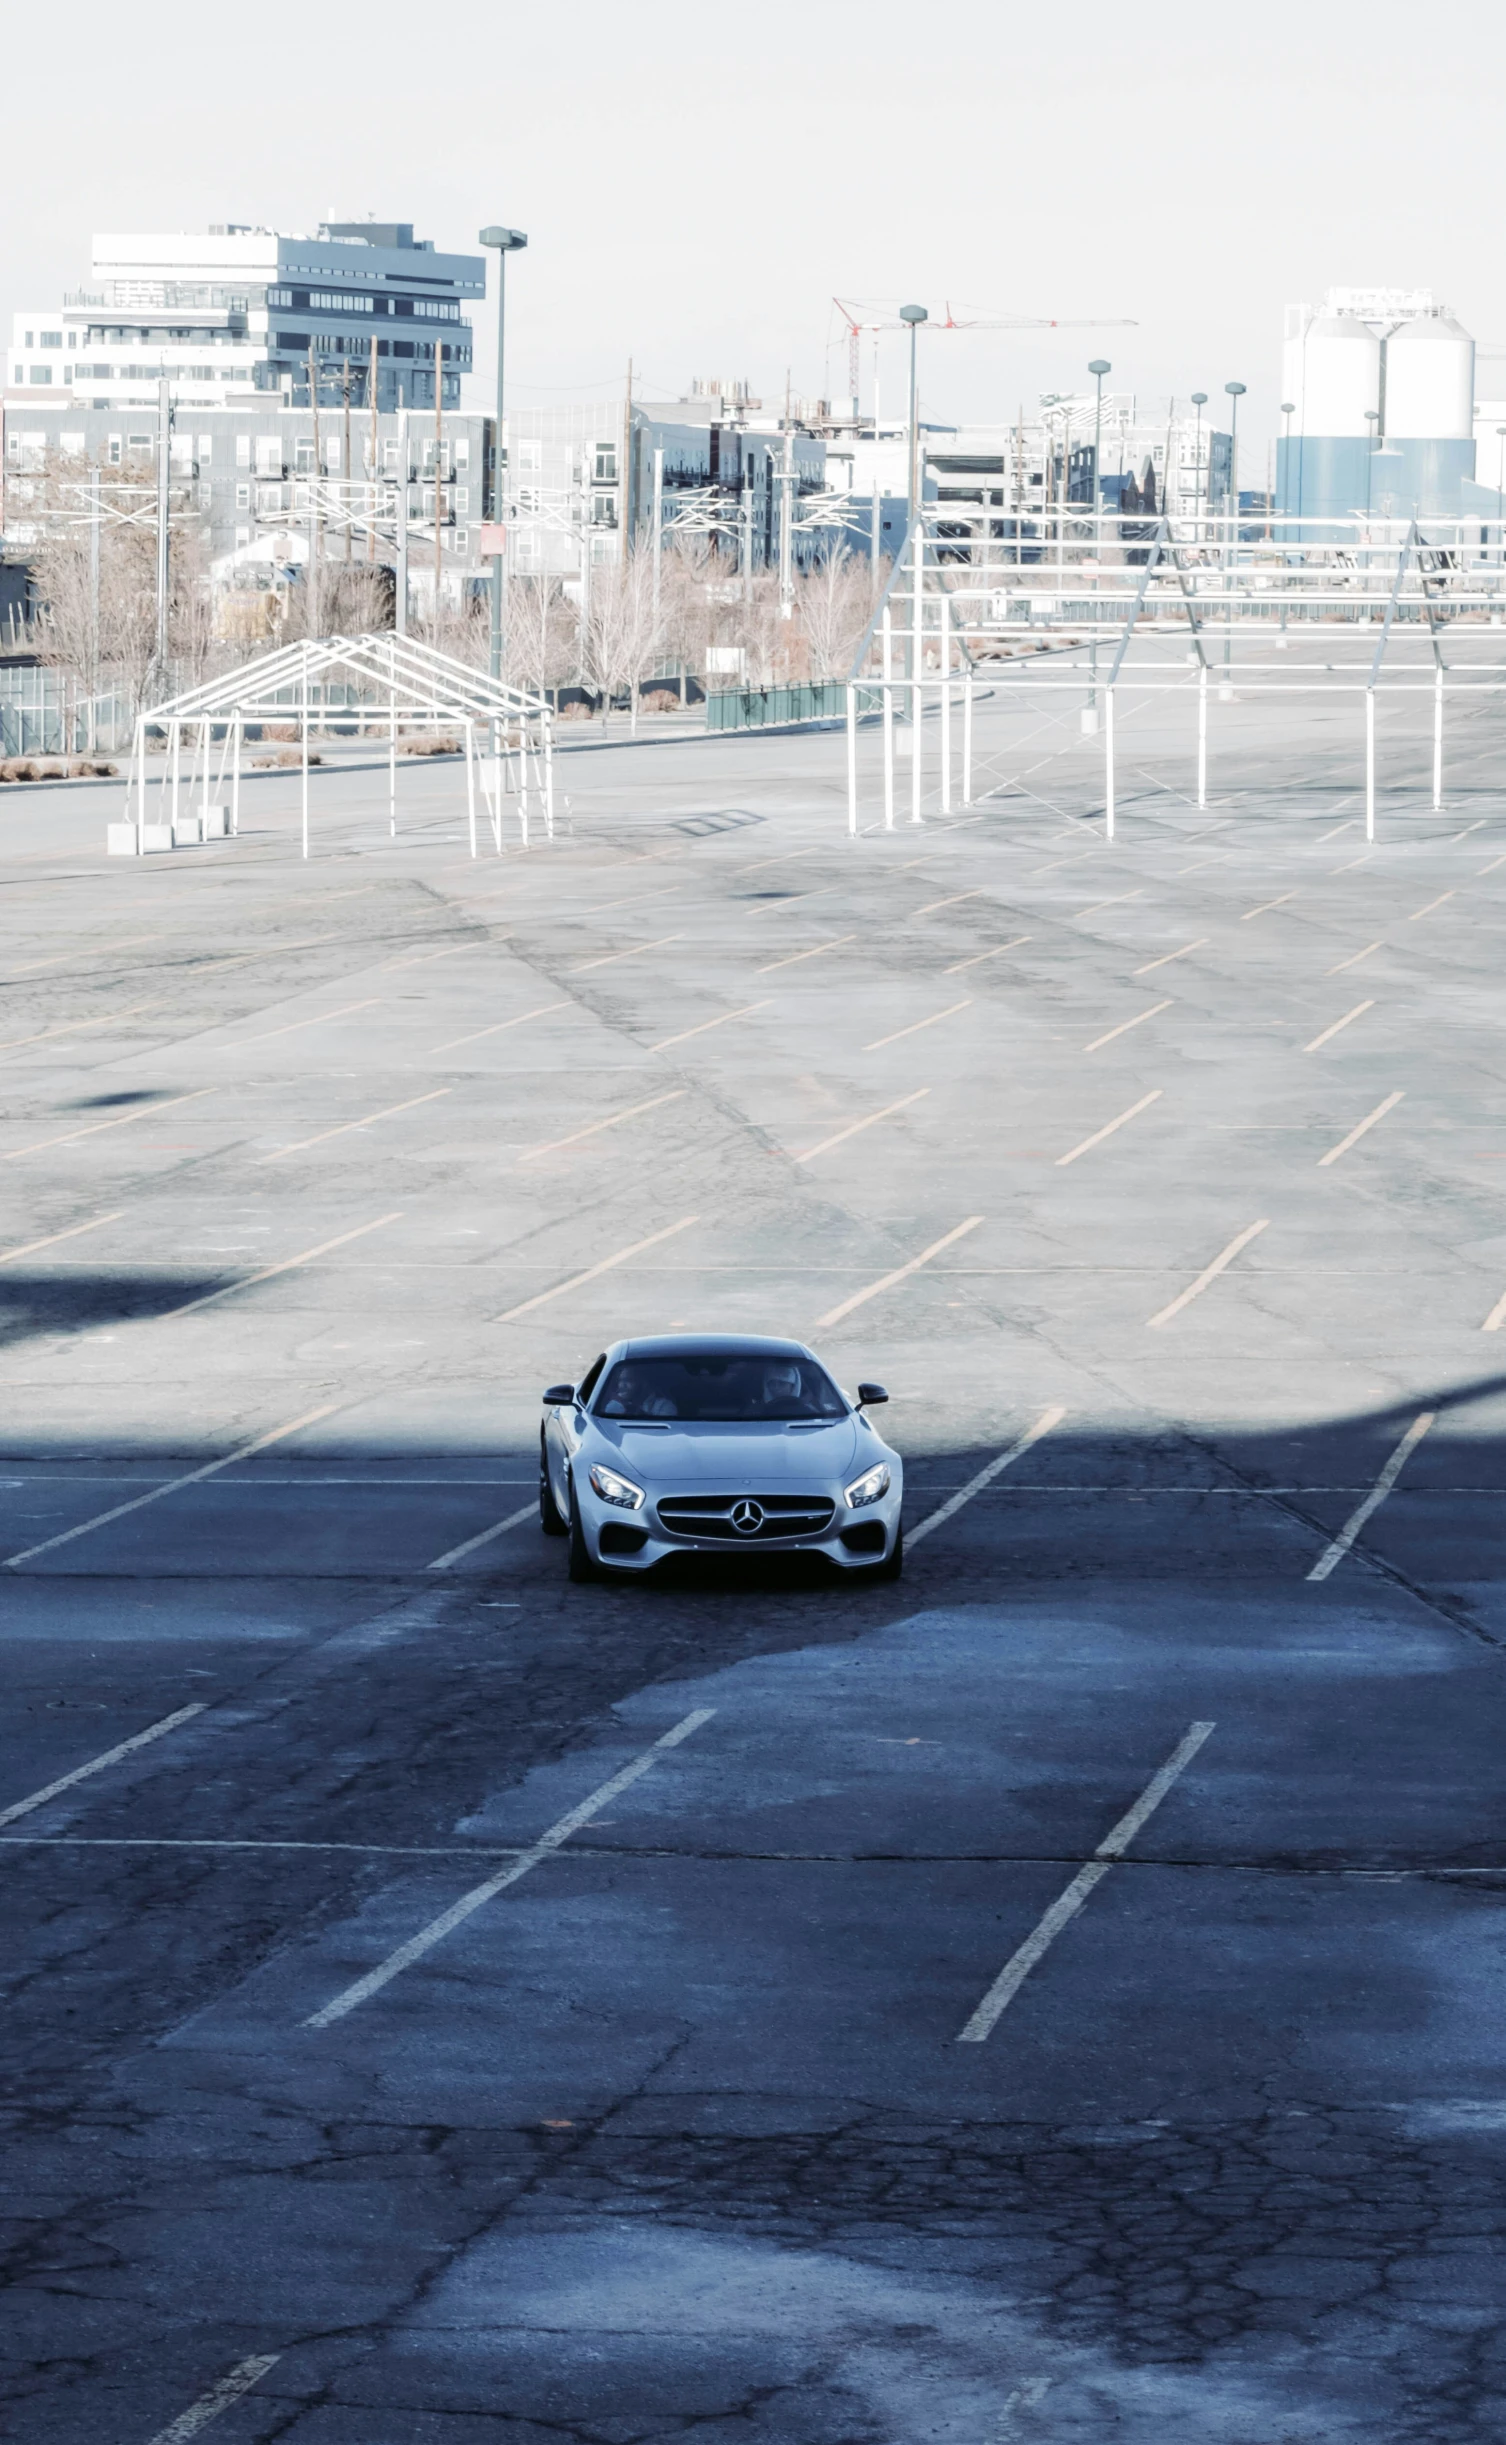 a white sports car driving on asphalt in a parking lot